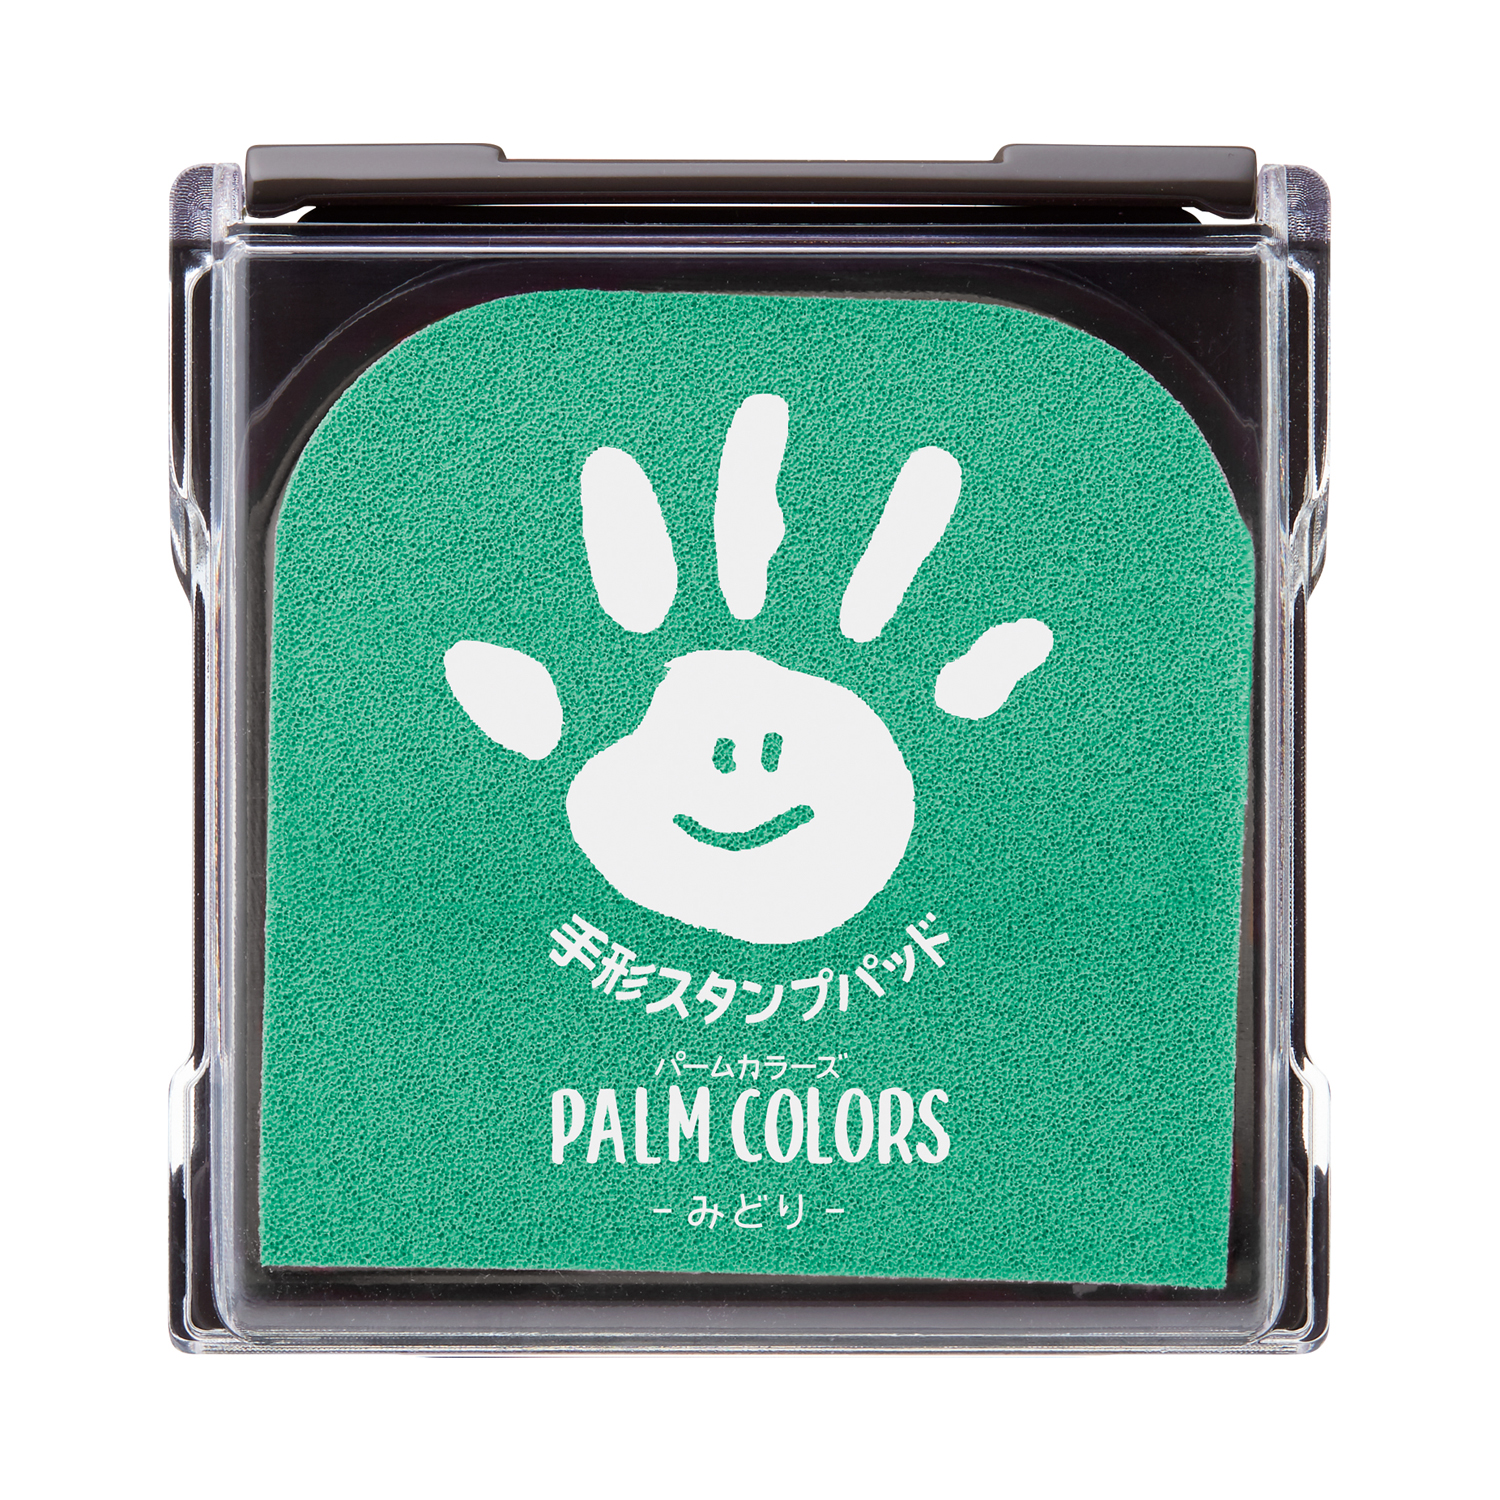 PALM COLORS みどり